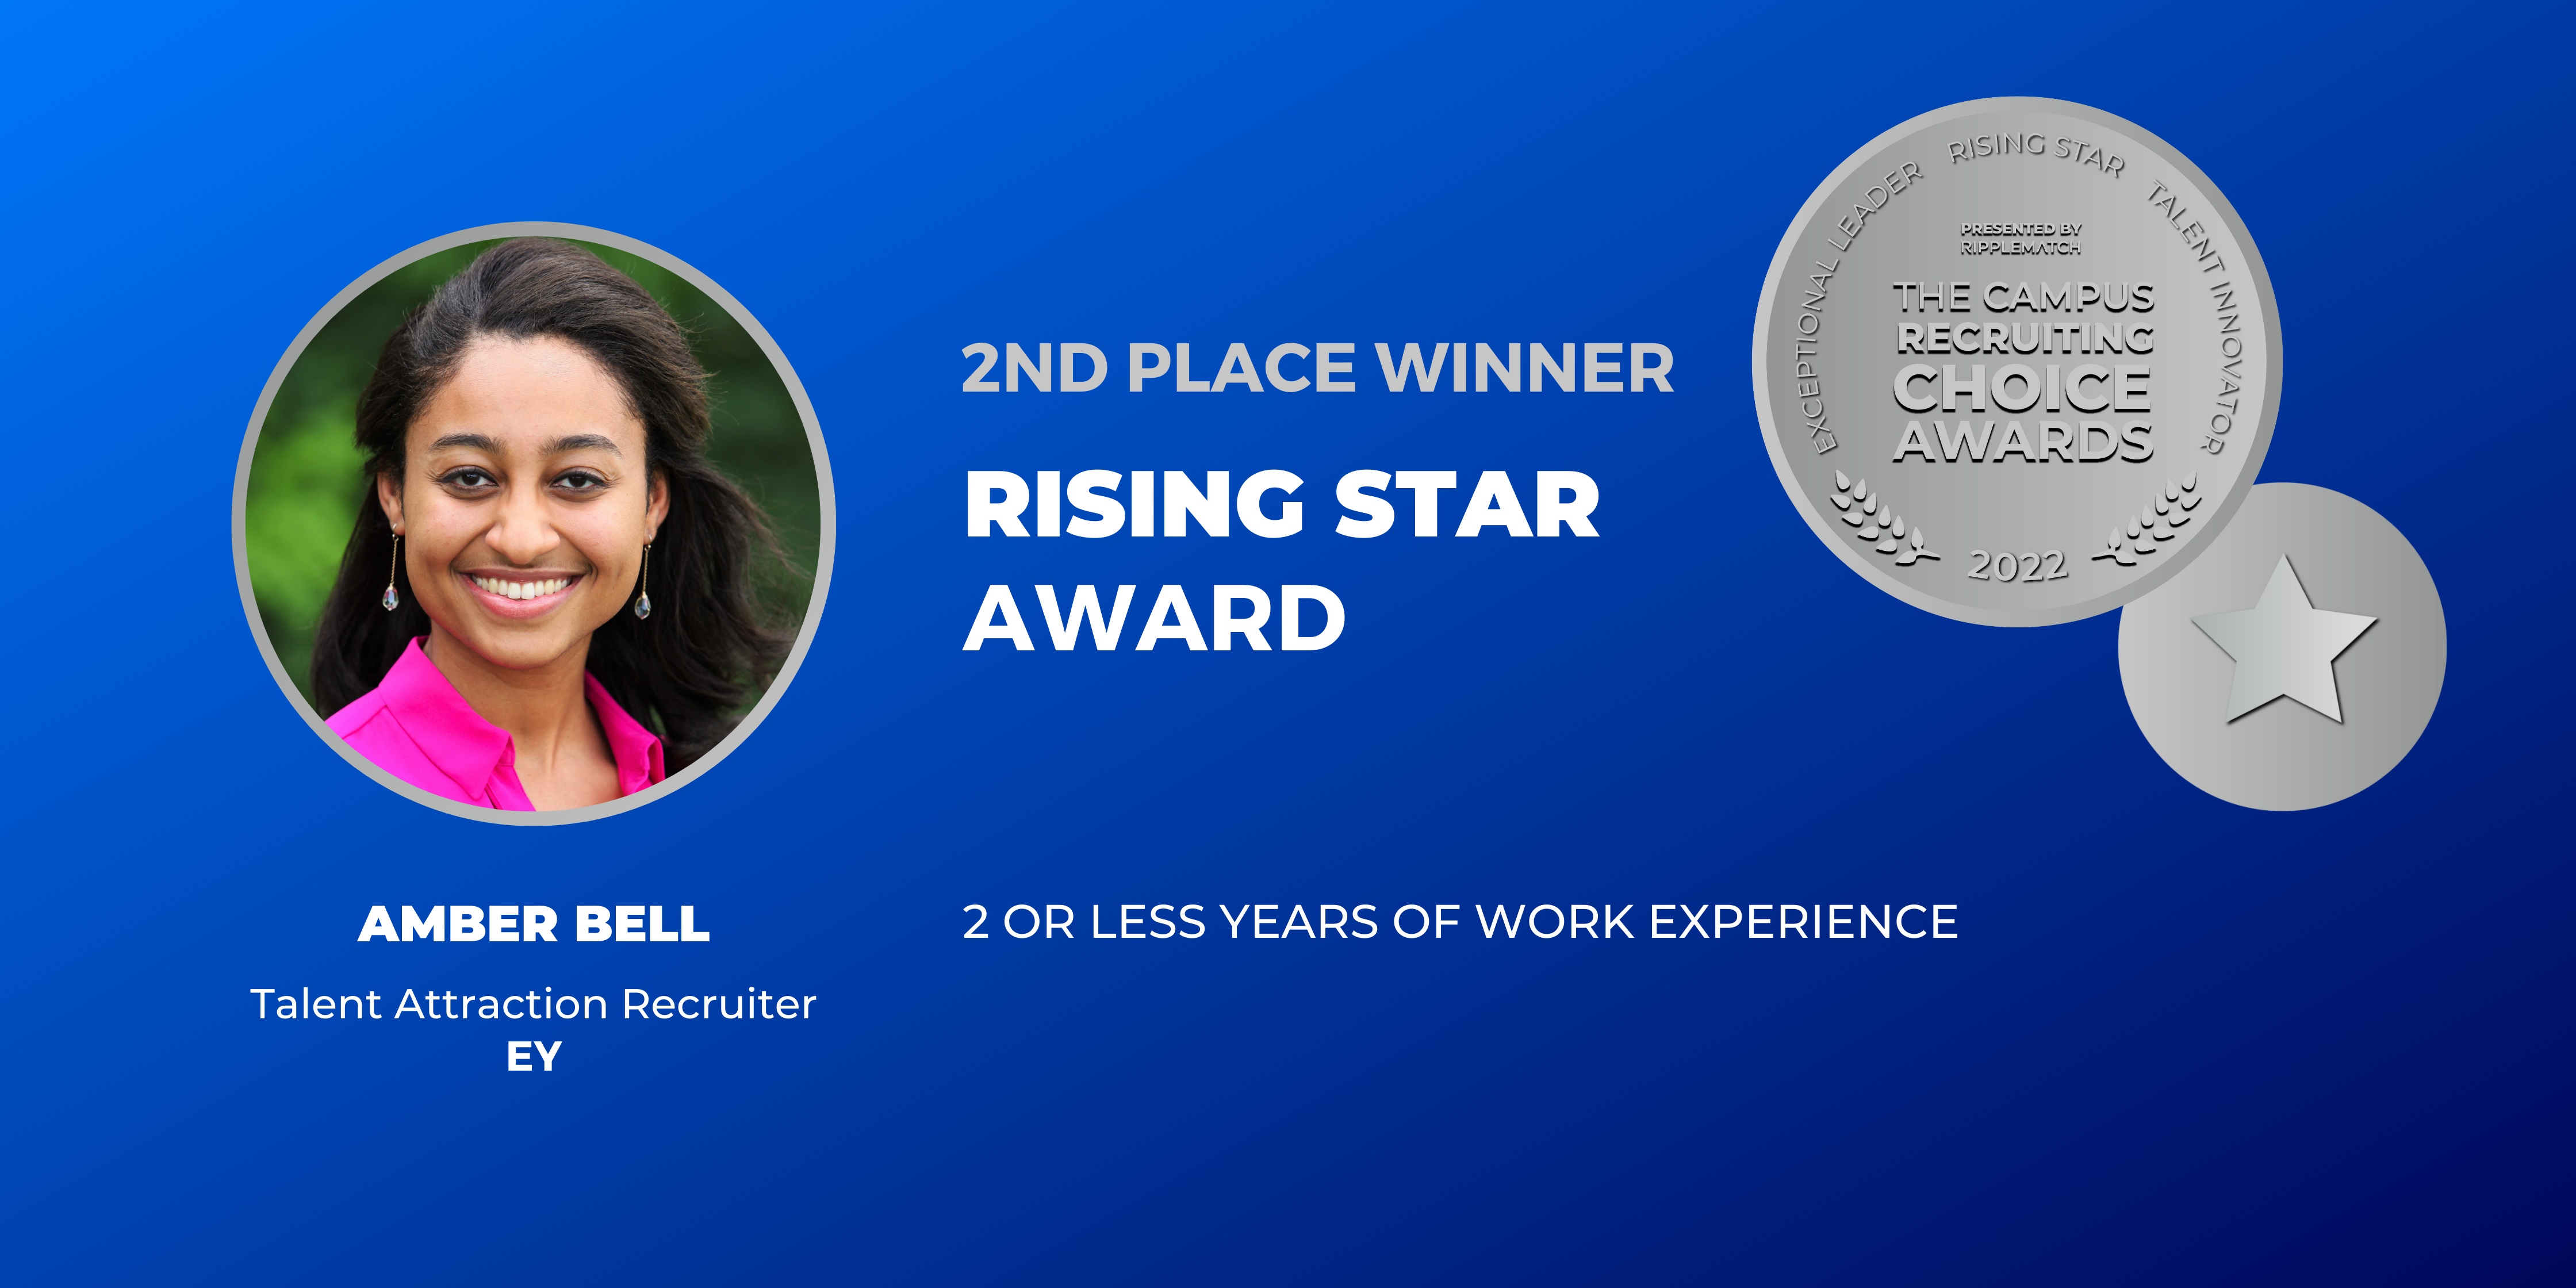 RISING STAR - 2nd place - 2 or Less Years of Work Experience - Amber Bell